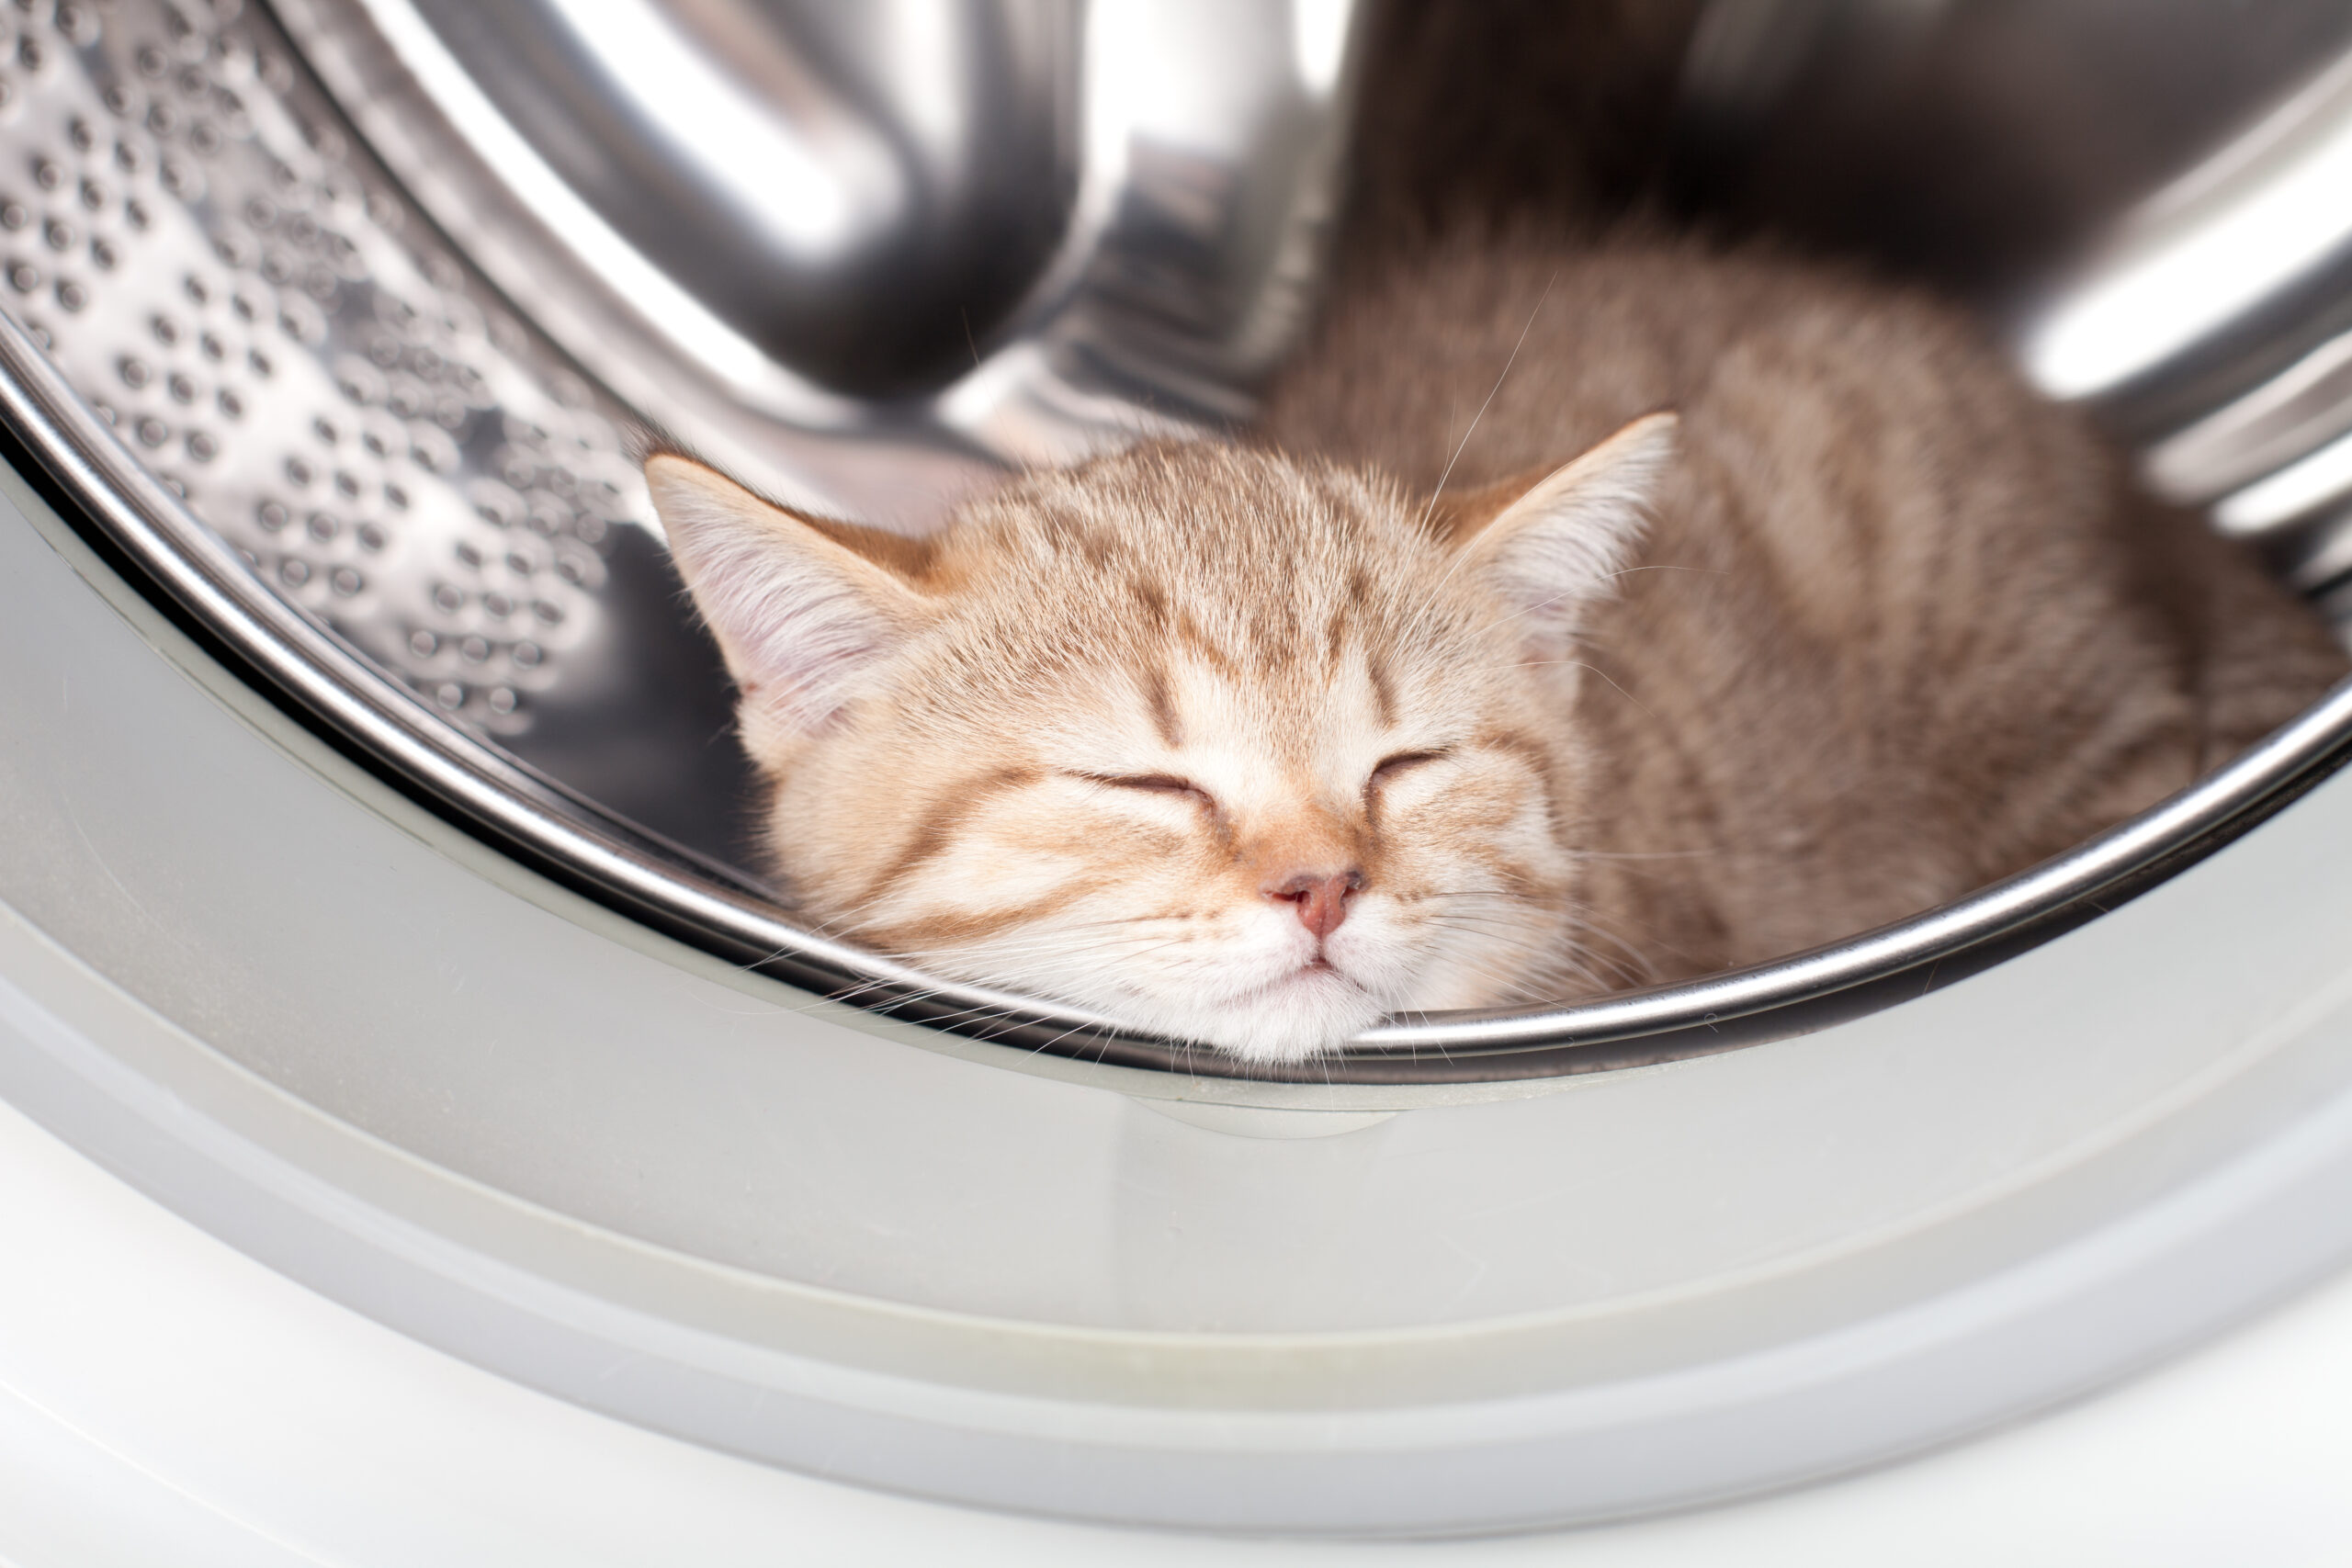 5 Surprising Items That Should Not Go into the Washer